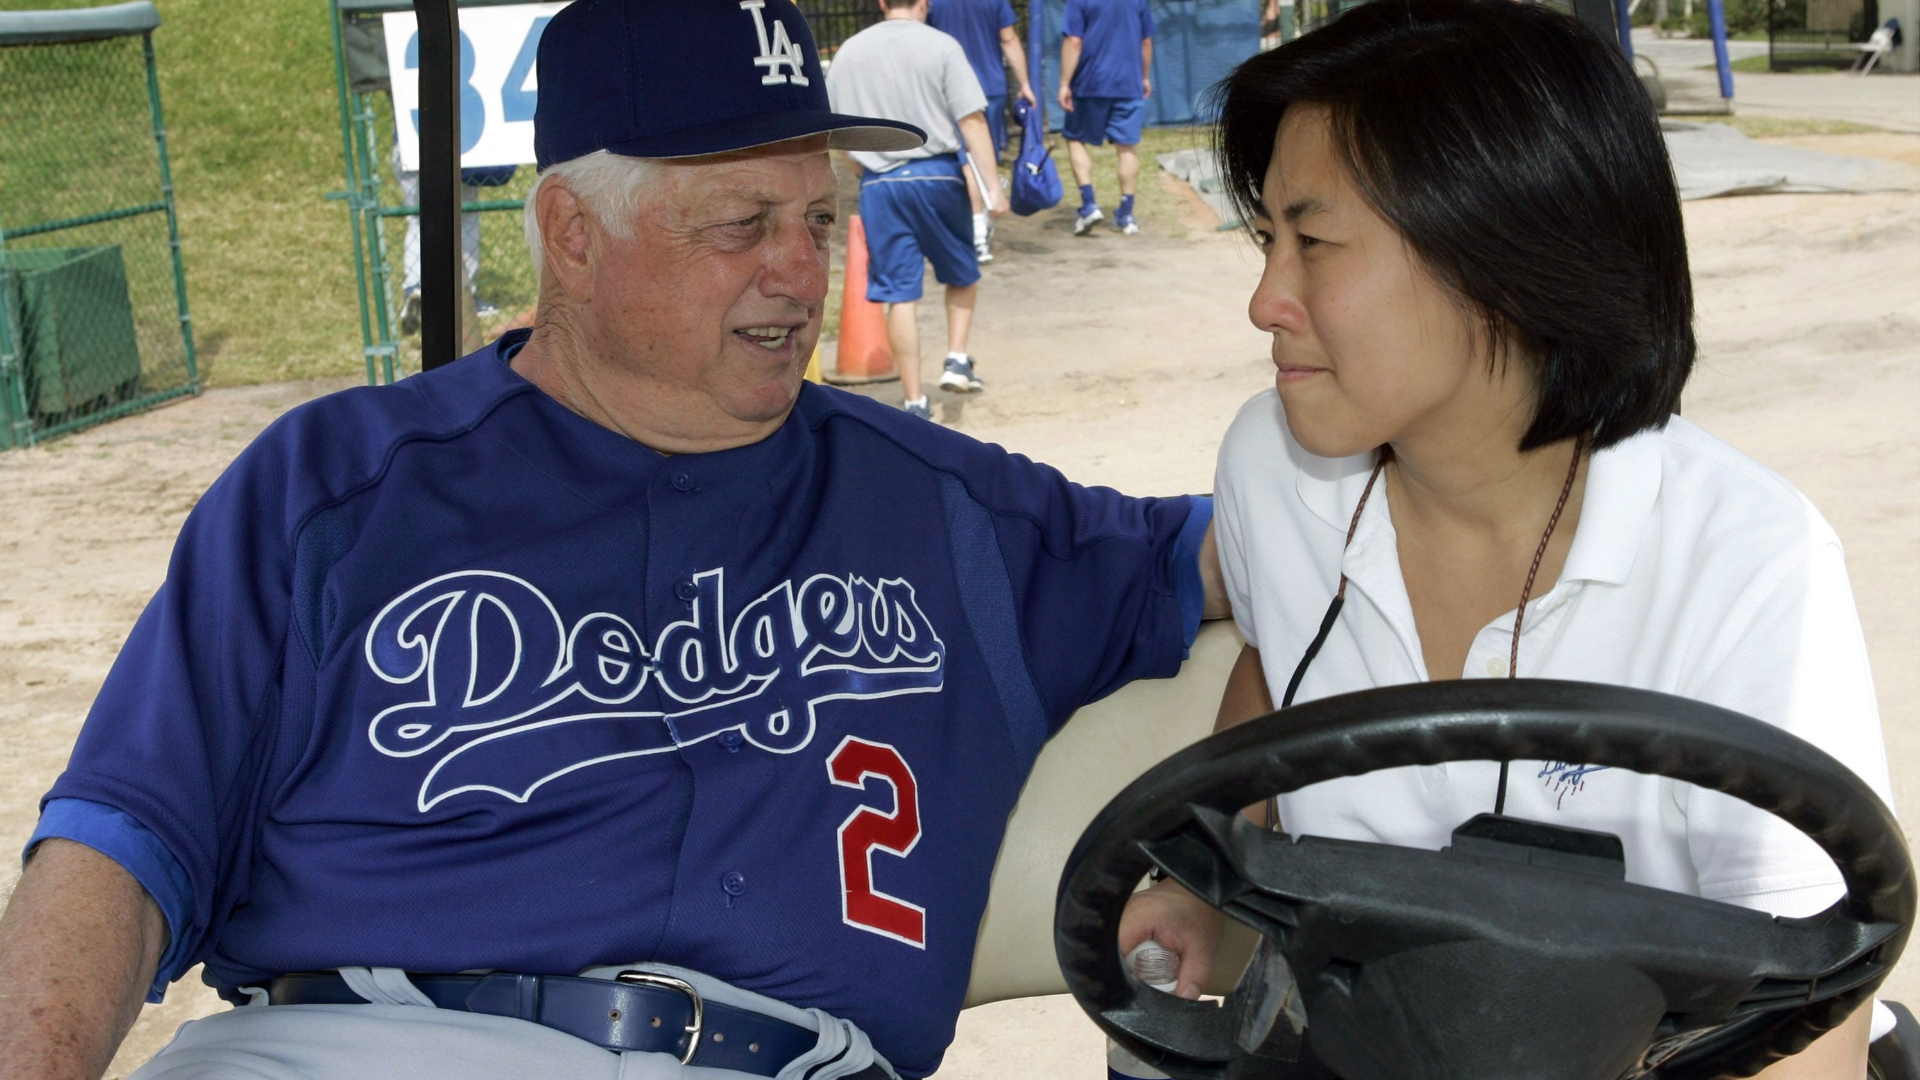 Tommy Lasorda, Hall of Fame Los Angeles Dodgers manager, dies at 93